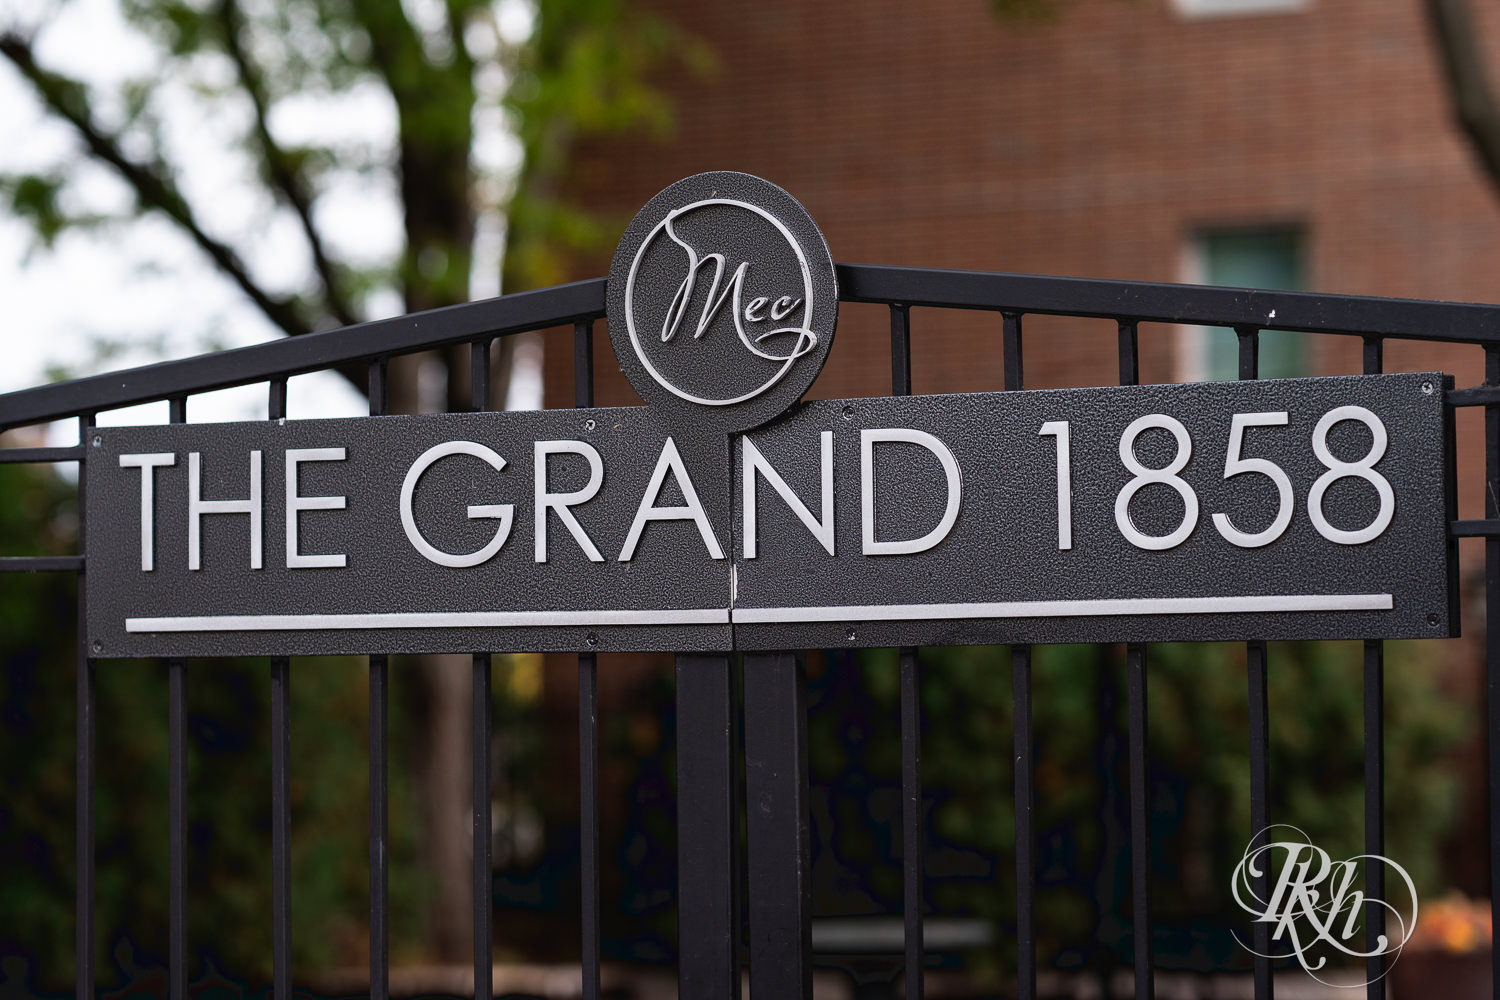 The sign at the gate of The Grand 1858 in Minneapolis, Minnesota.